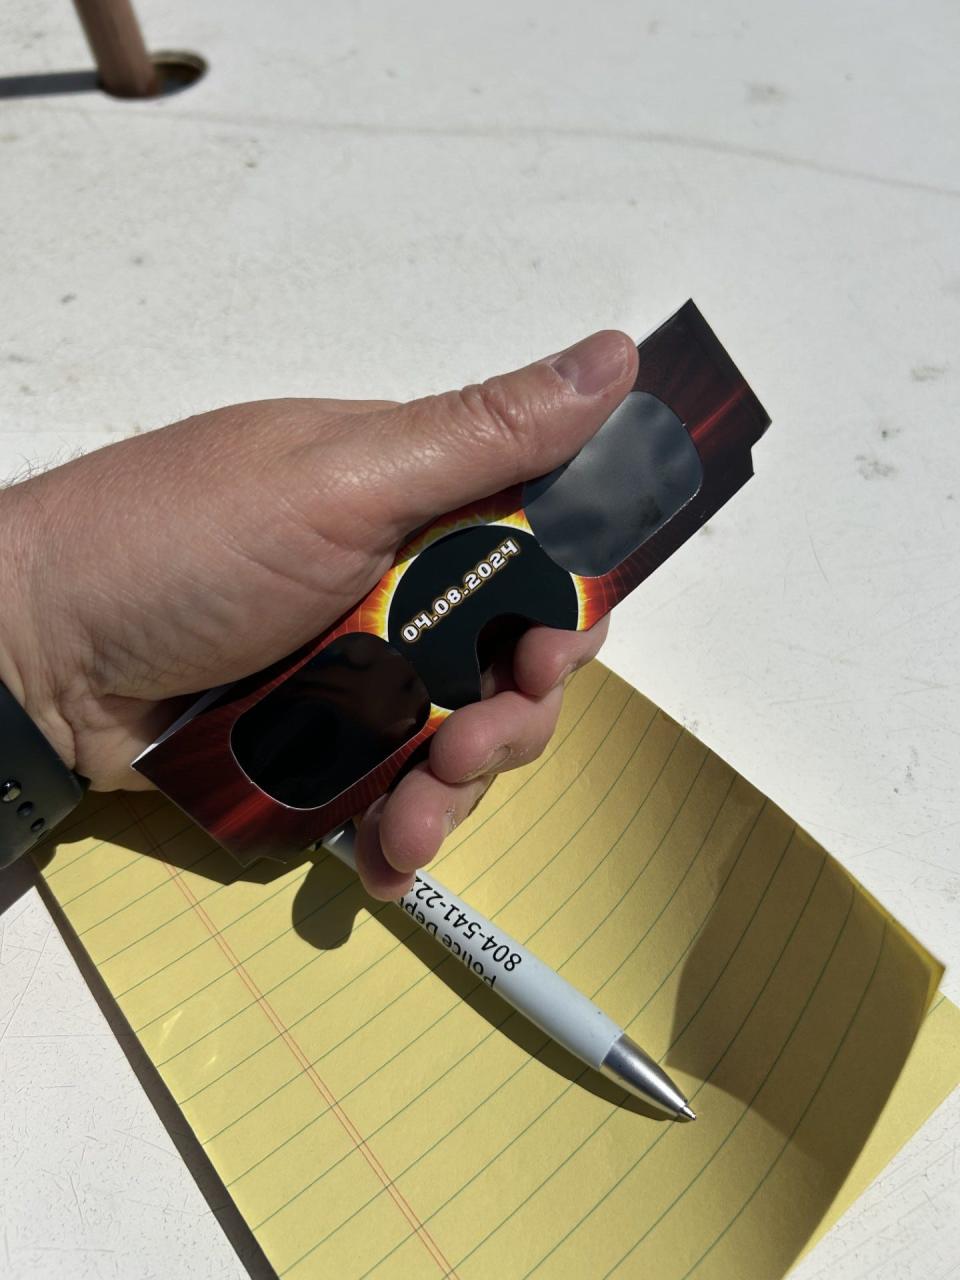 No play-by-play of the solar eclipse would be complete without the proper solar-eclipse glasses and a notebook for reporting news the old-school way.